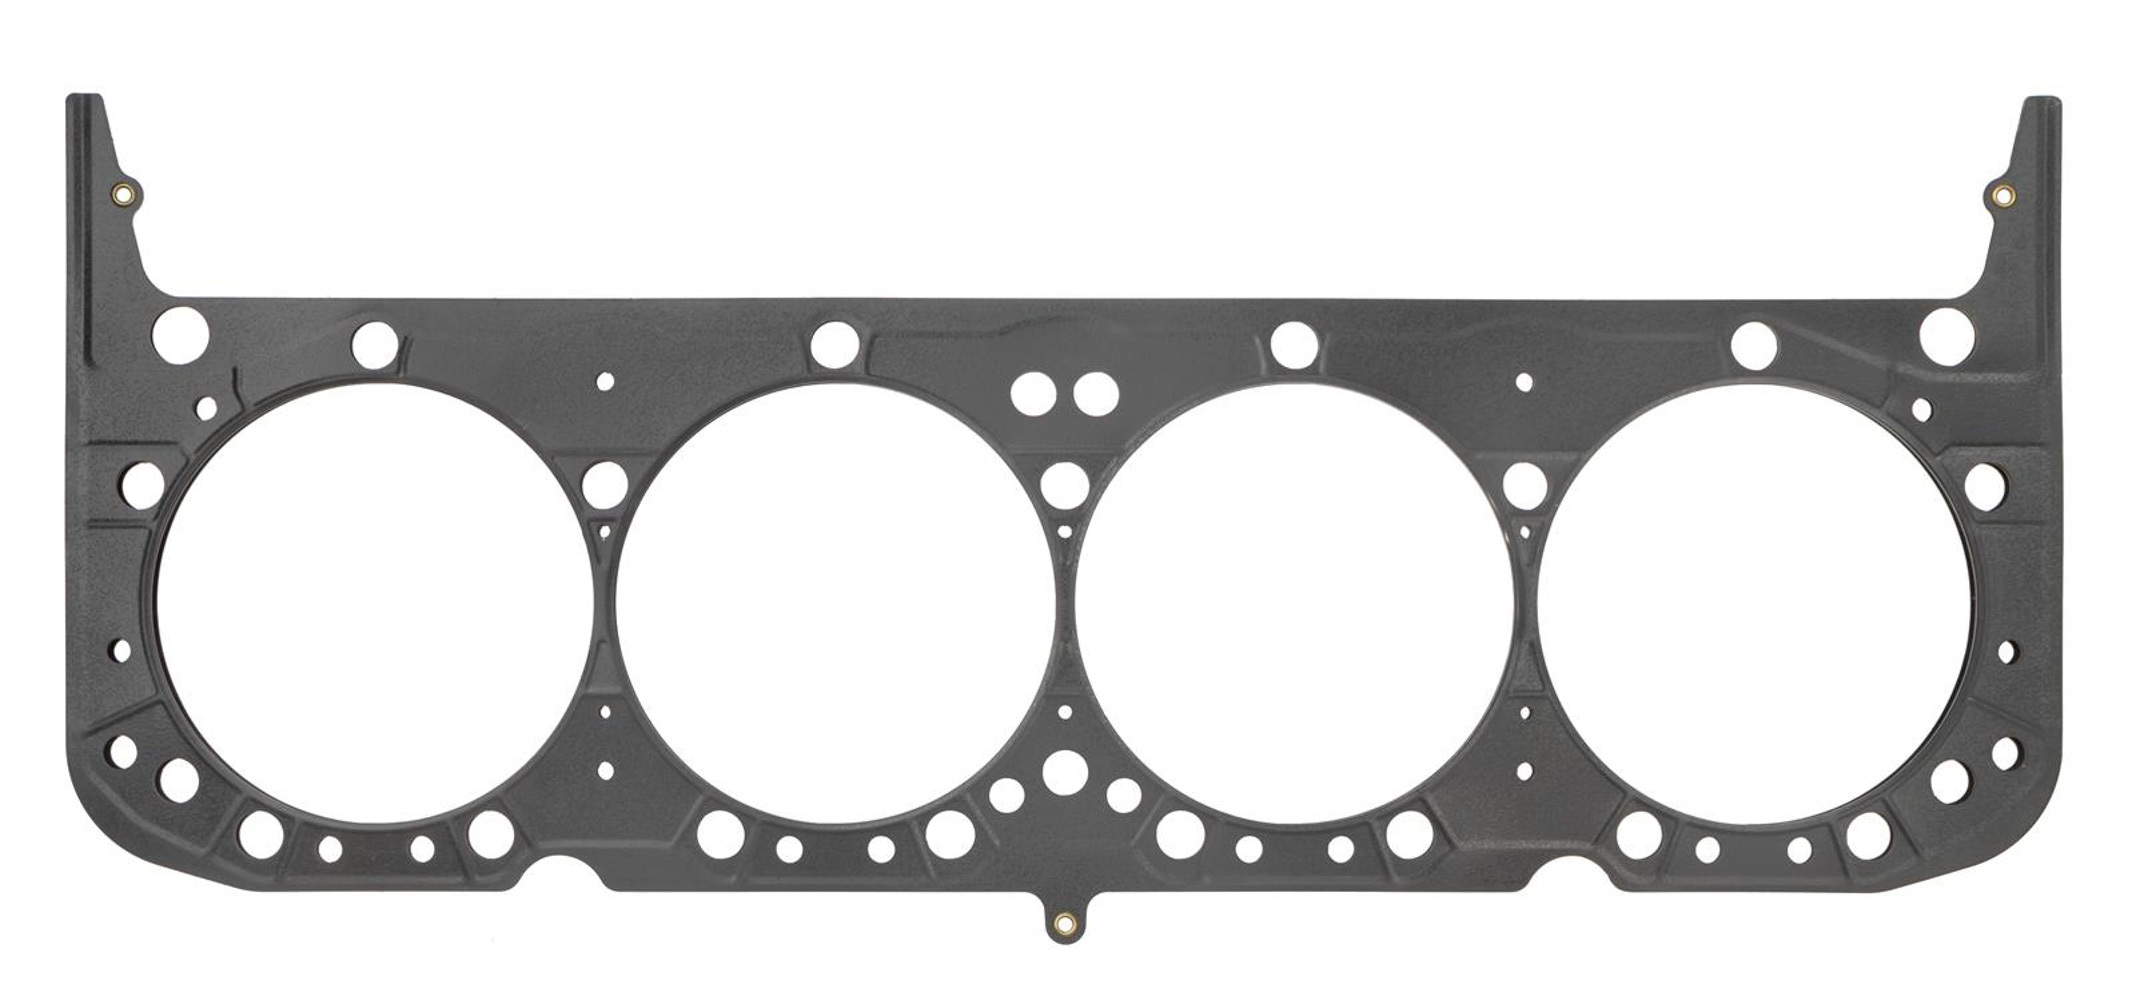 SCE Gaskets M112167 - Cylinder Head Gasket, MLS Spartan, 4.213 in Bore, 0.067 in Compression Thickness, Multi-Layer Steel, Small Block Chevy, Each